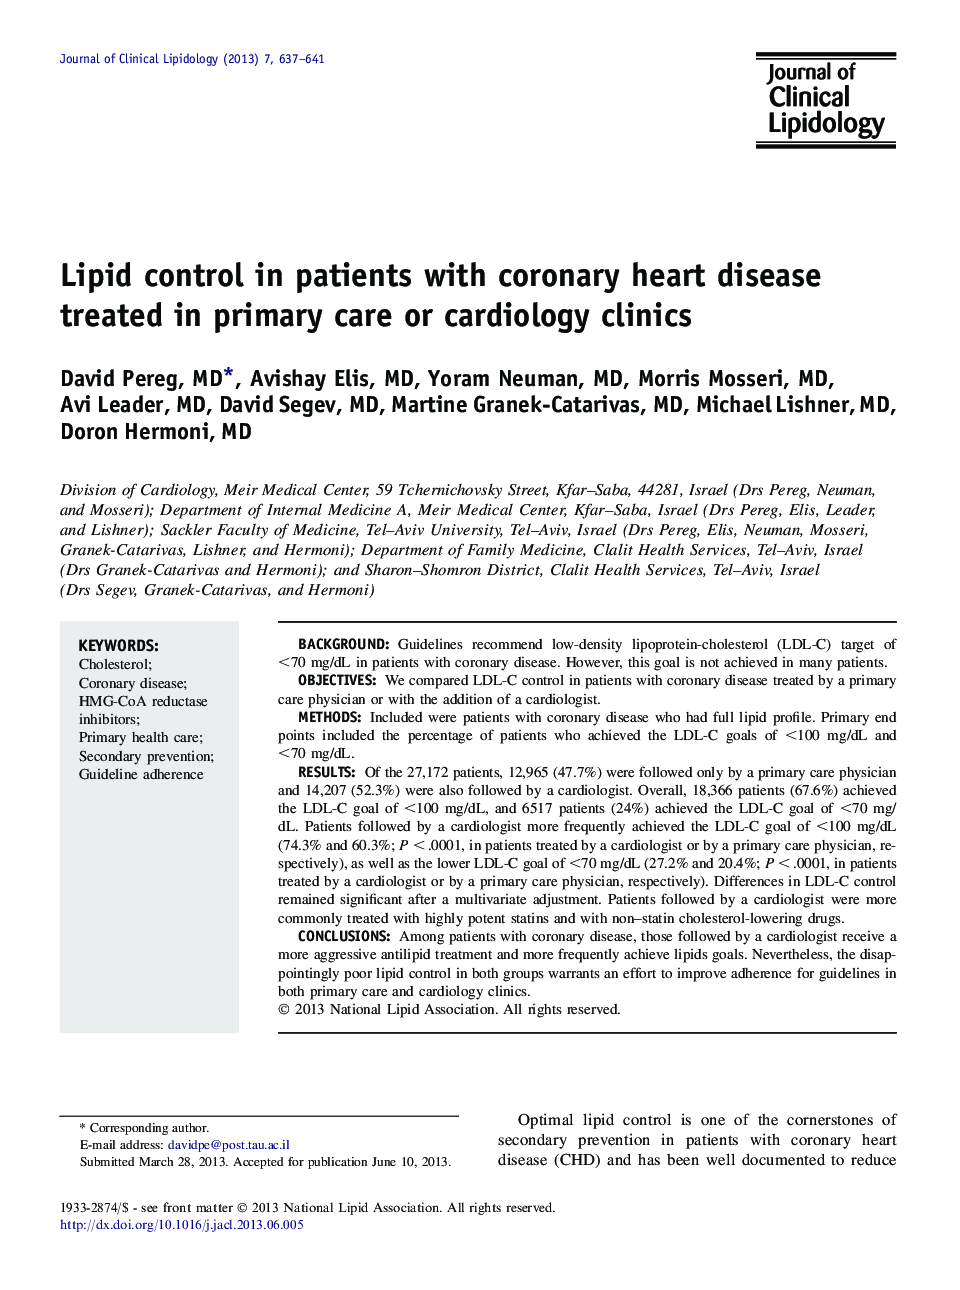 Lipid control in patients with coronary heart disease treated in primary care or cardiology clinics